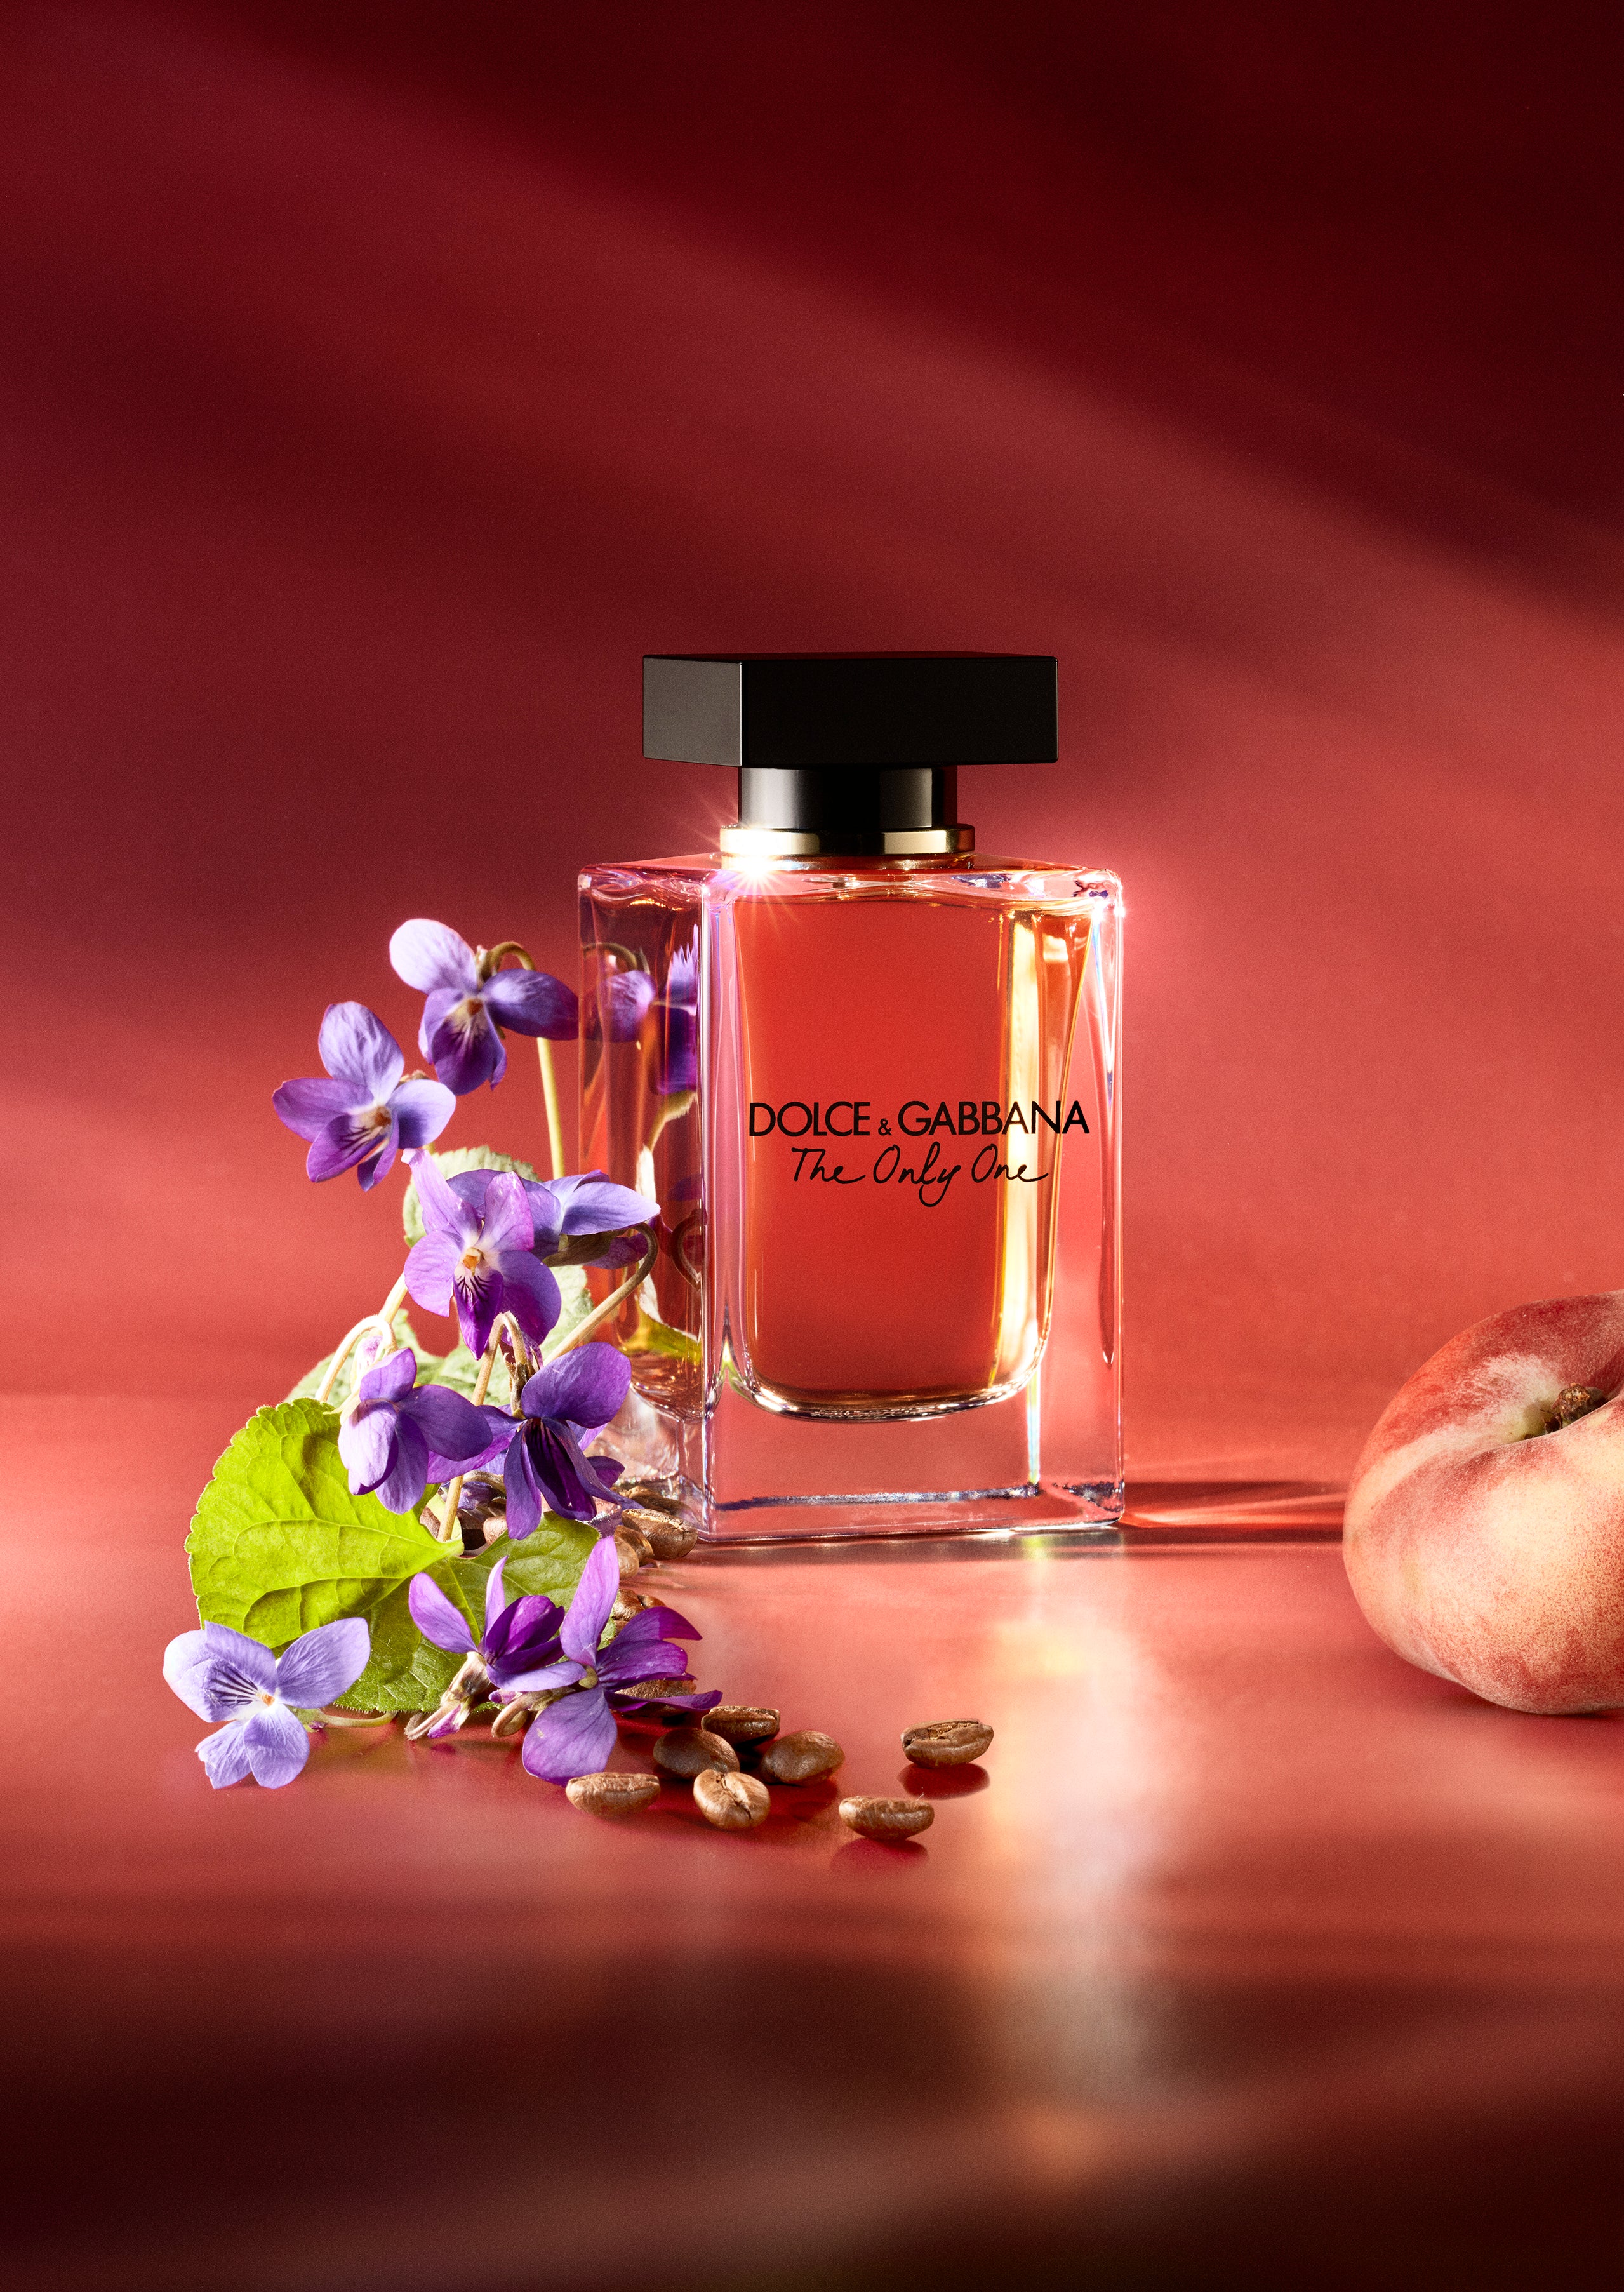 DOLCE & GABBANA The Only One EDP 100ml